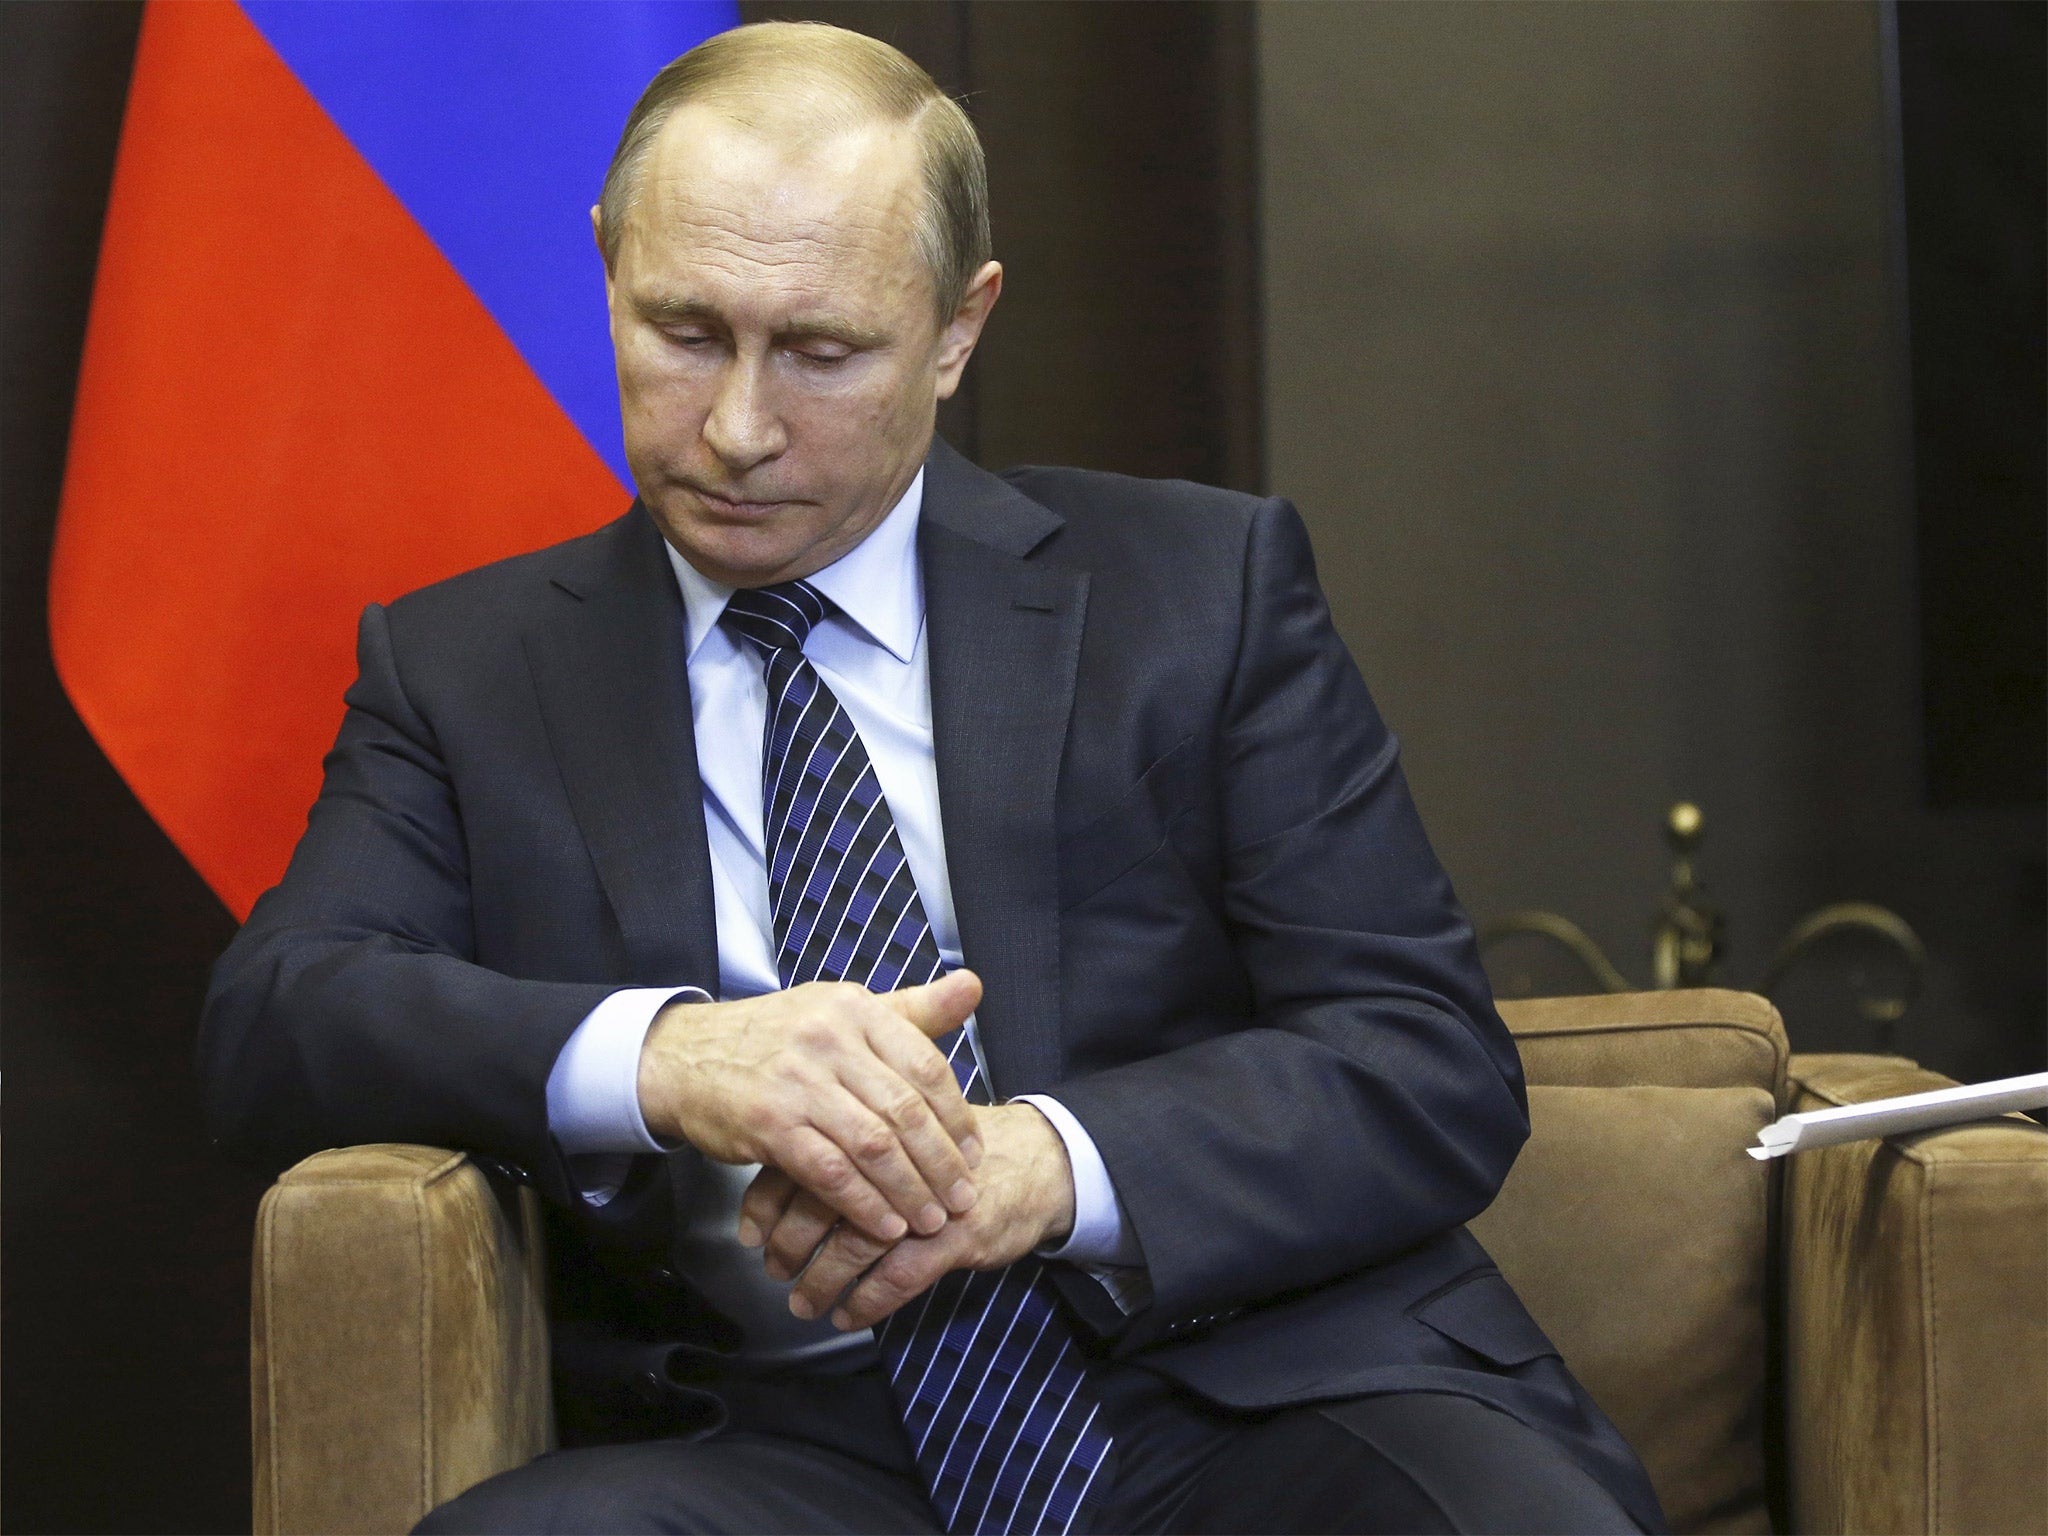 Vladimir Putin called the downing of the jet ‘a stab in the back’